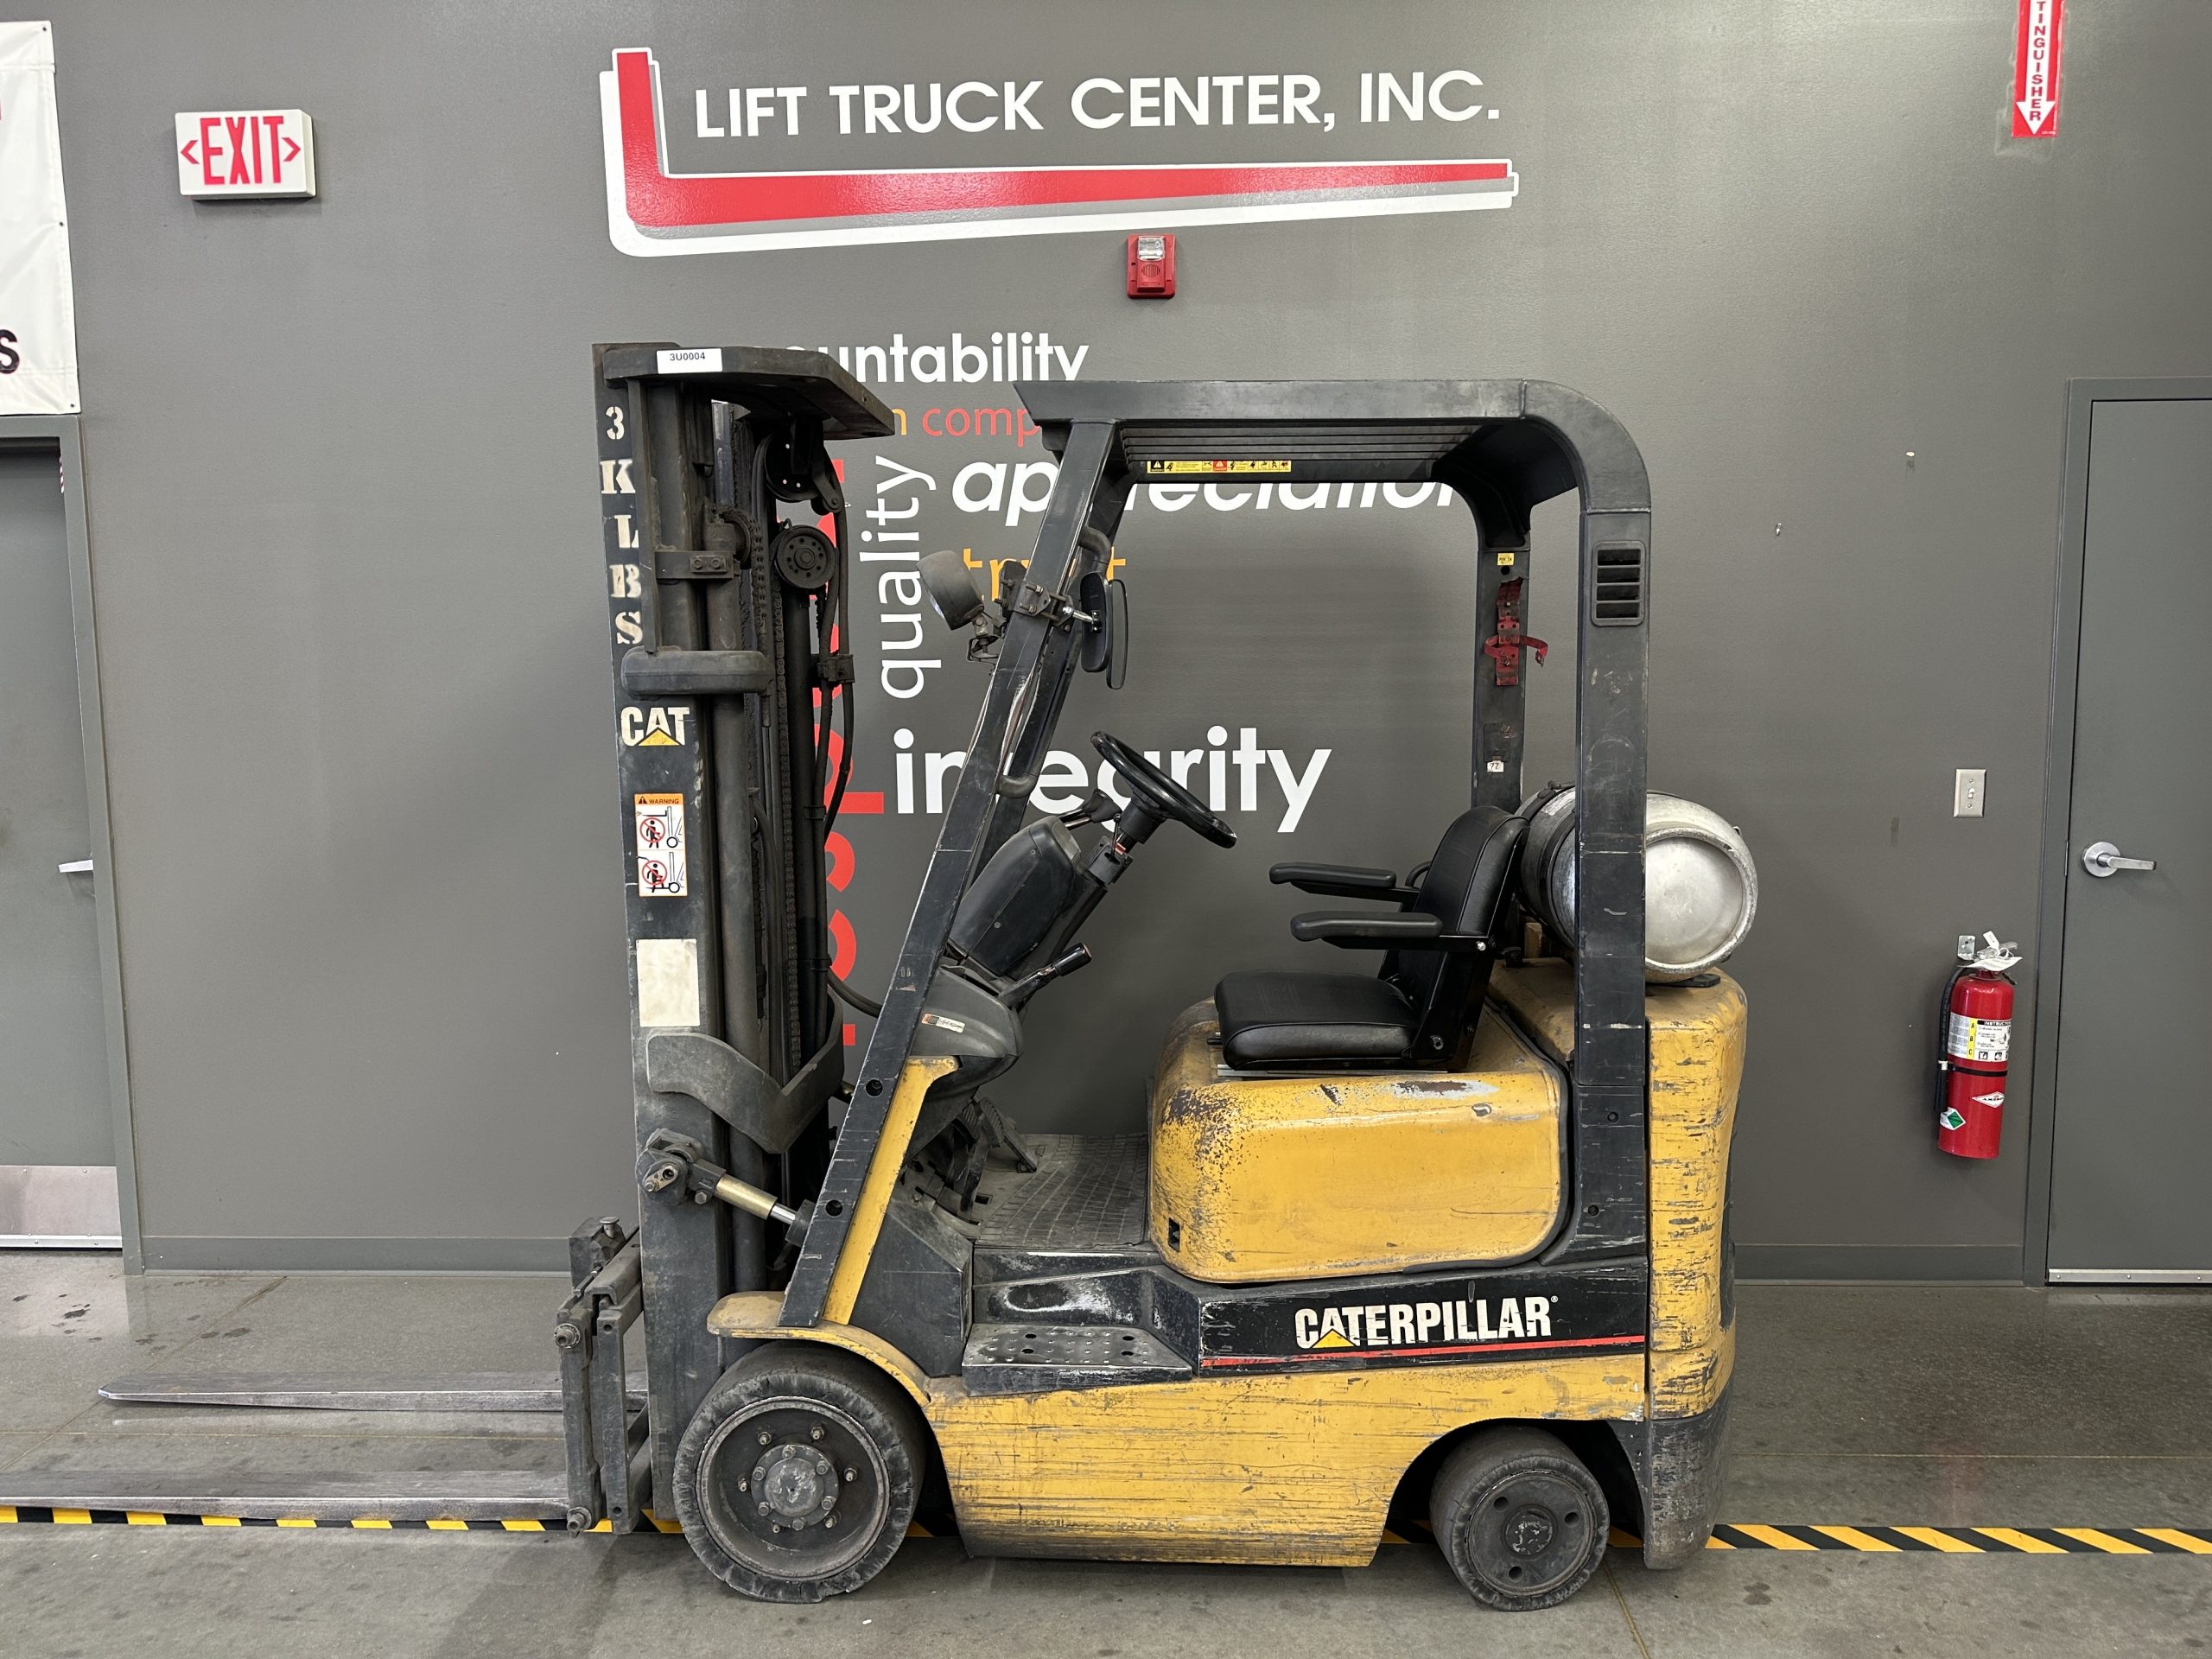 Featured image for “CATERPILLAR 3,000 LBS. CUSHION TIRED FORKLIFT”